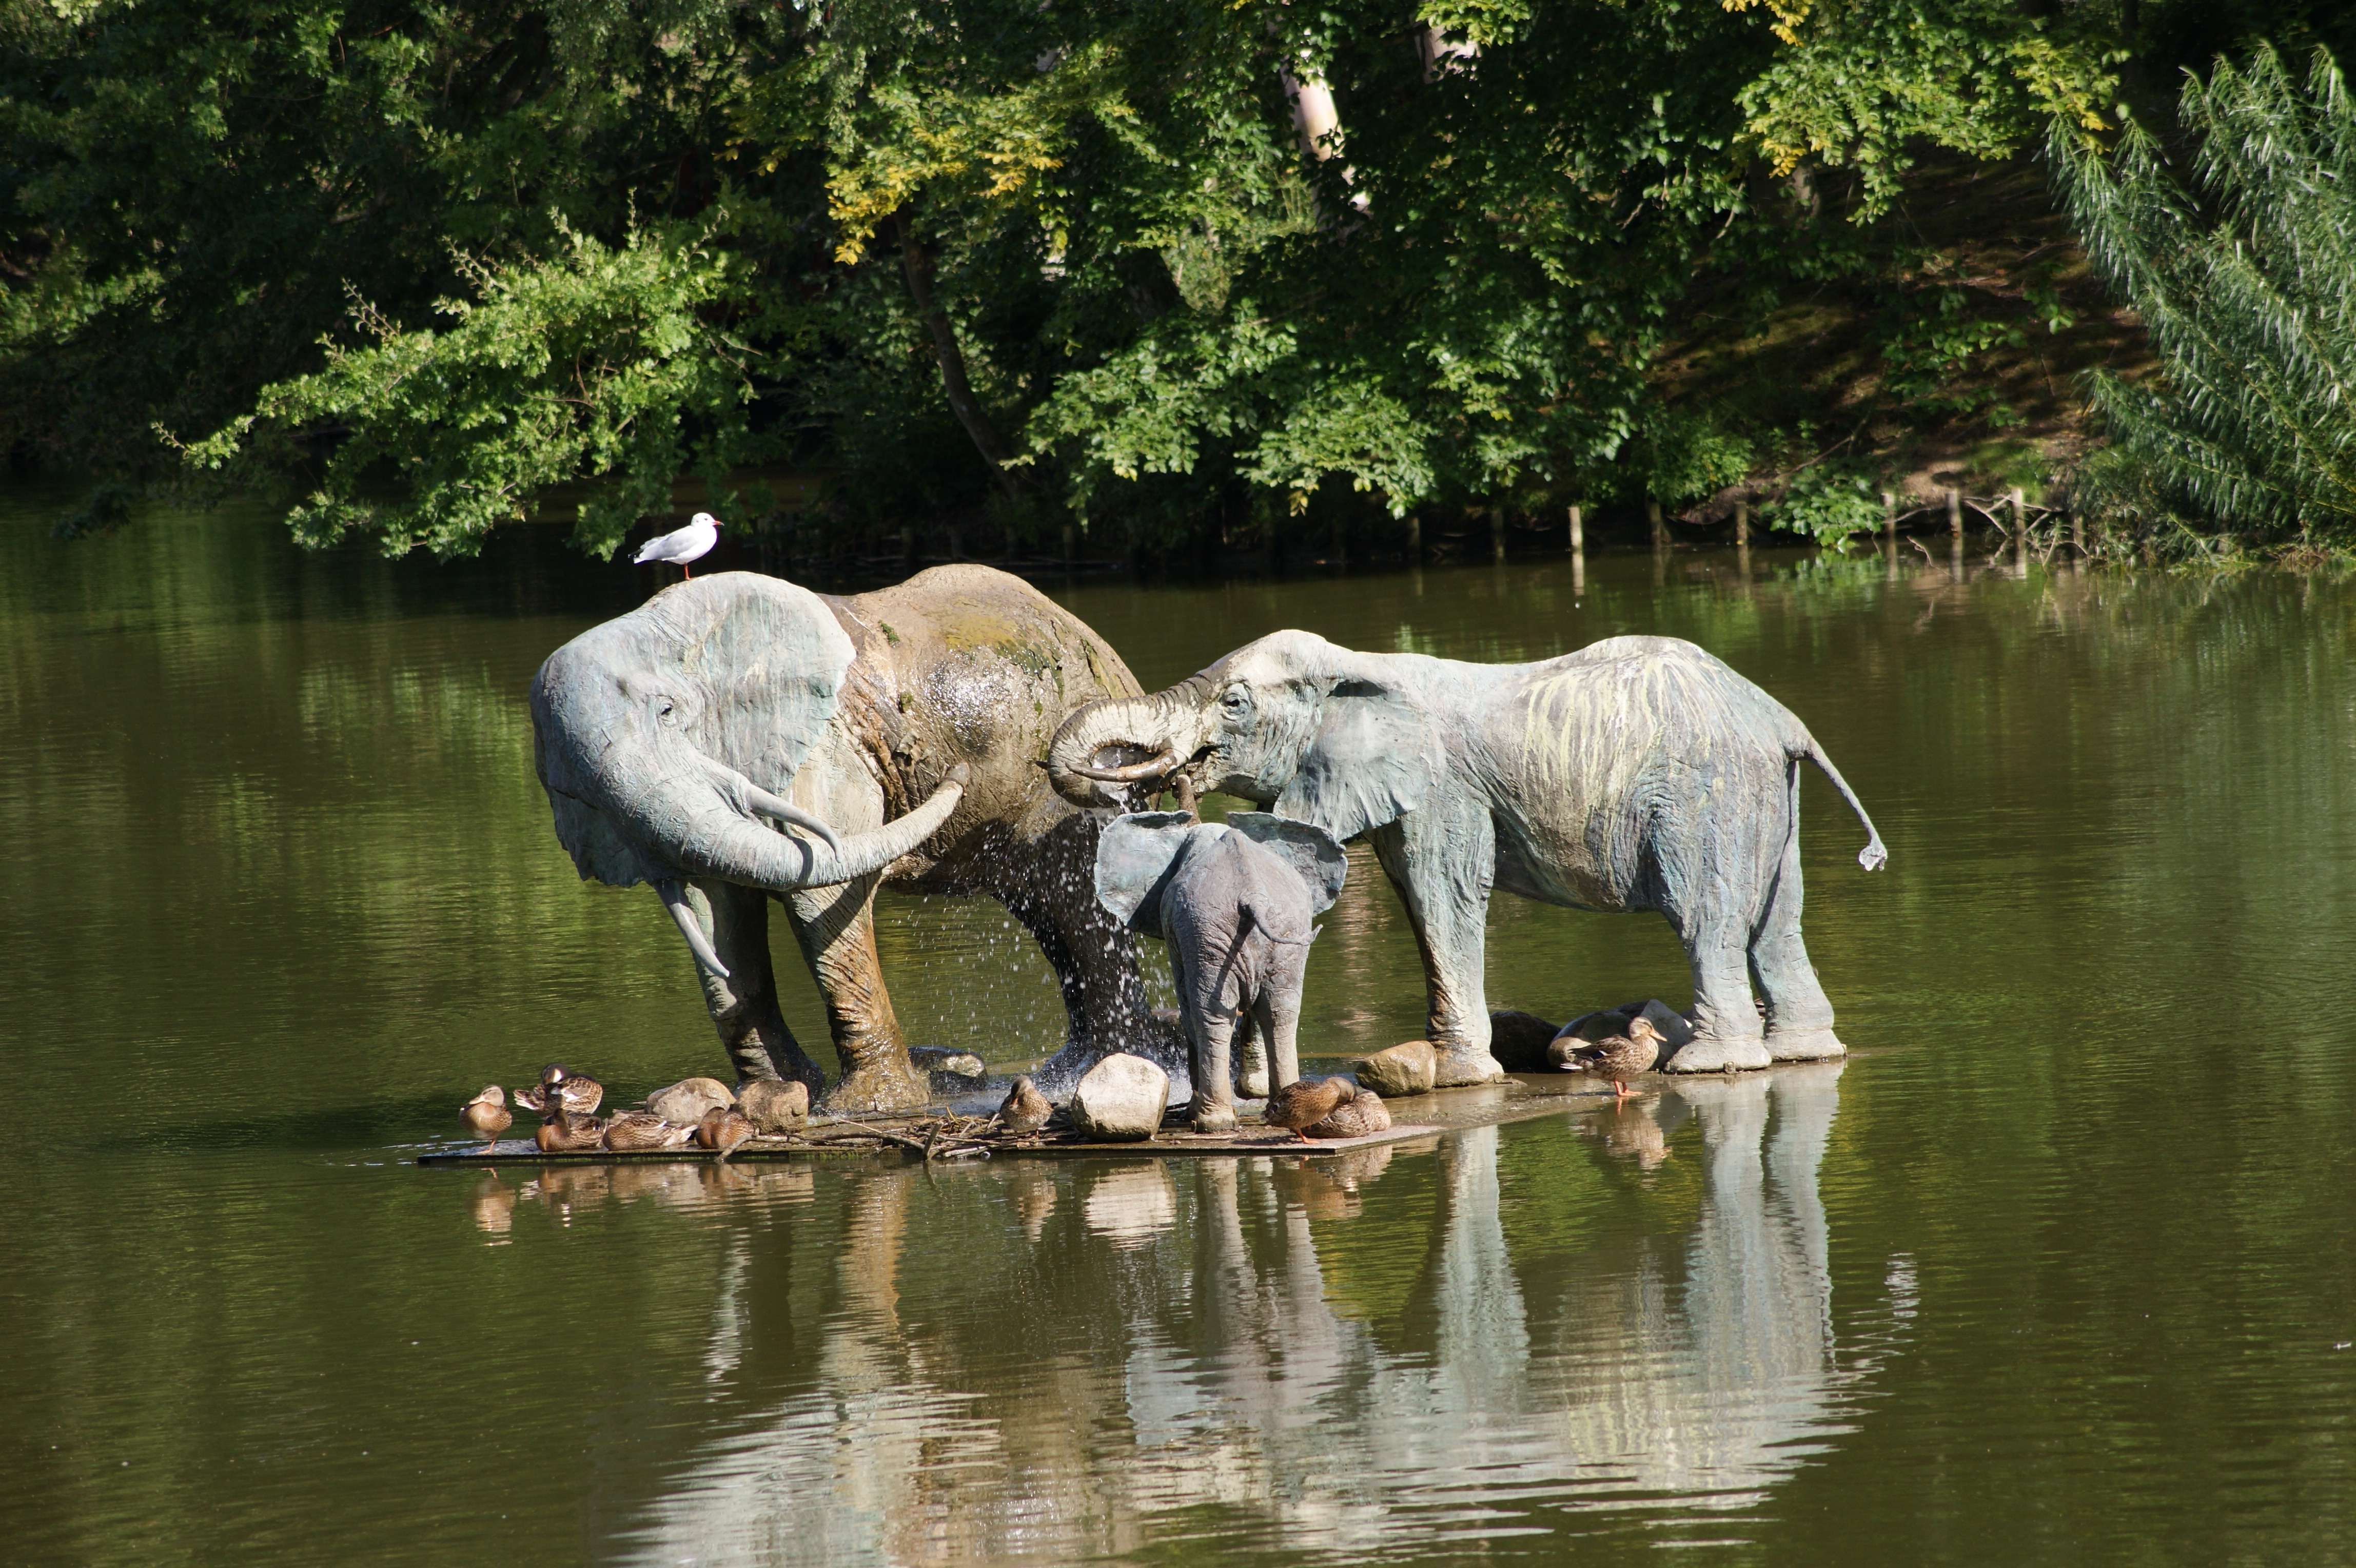 Elephants, Sculpture, Water, Knuthenborg, reflection, animal themes